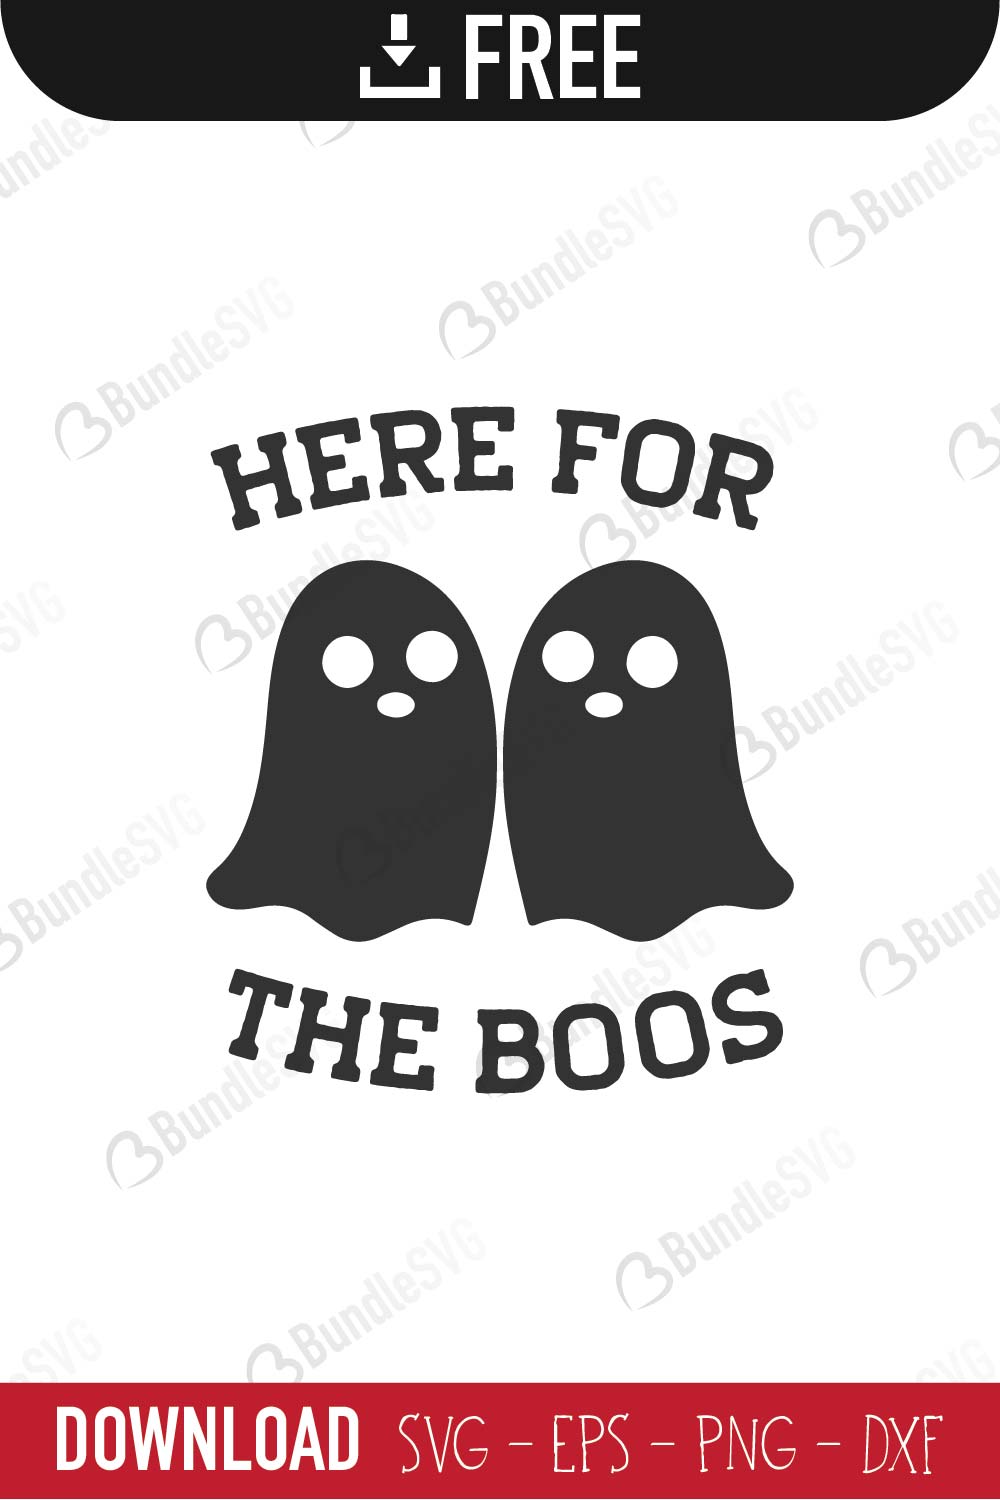 Download 35 Scaredy Cat Halloween Files Svg Library Stock Scrapbook Halloween Svg Png Image Transparent Png Free Download On Seekpng 35 Free Halloween Svg Images Download Png Yellowimages Mockups